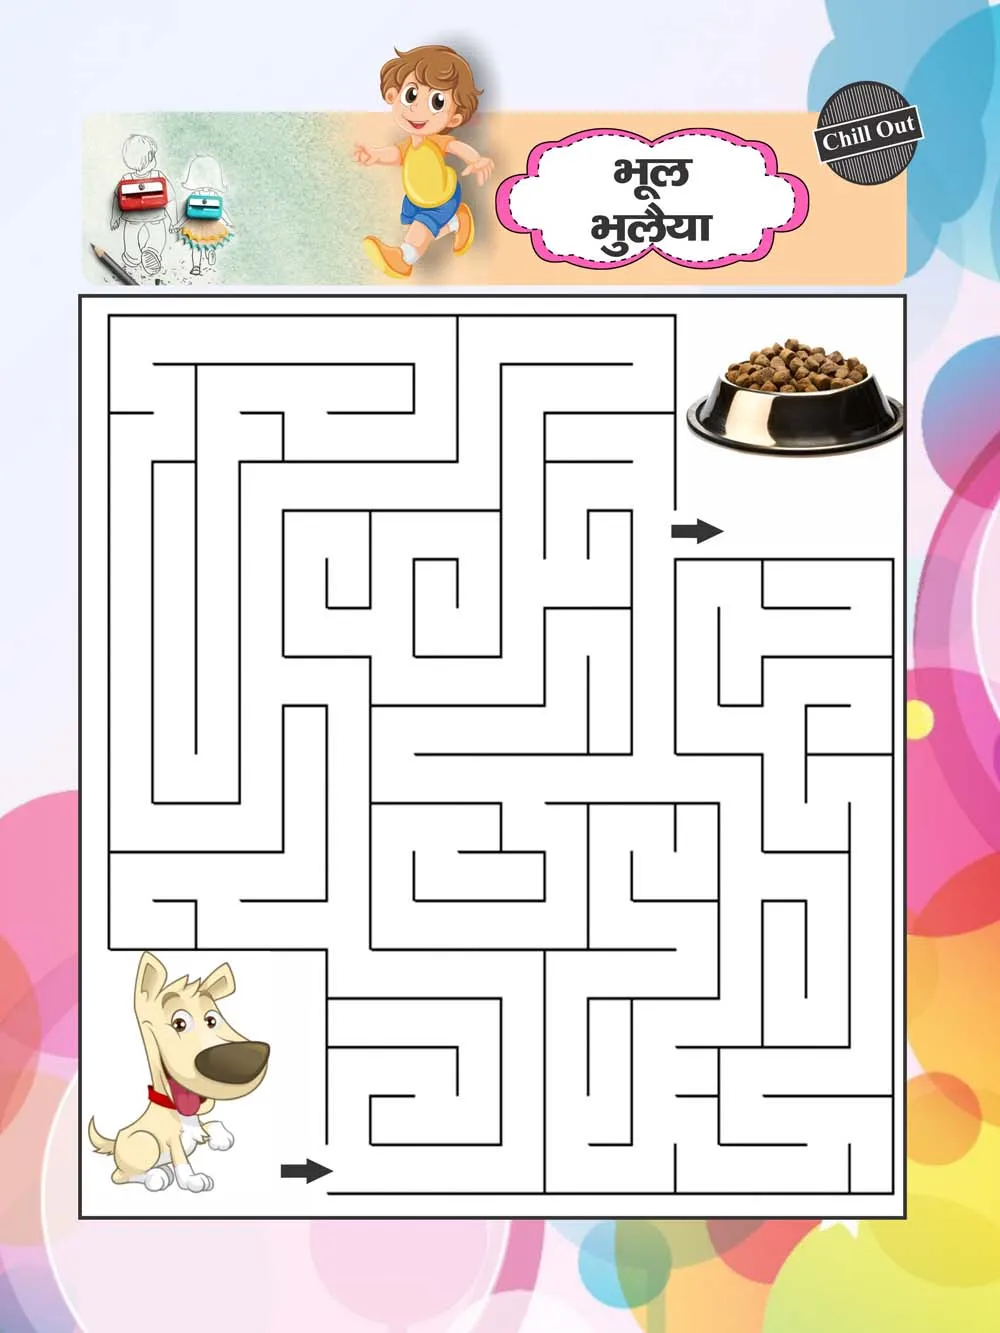 Solve the maze puzzle of this cute animal, part - 16